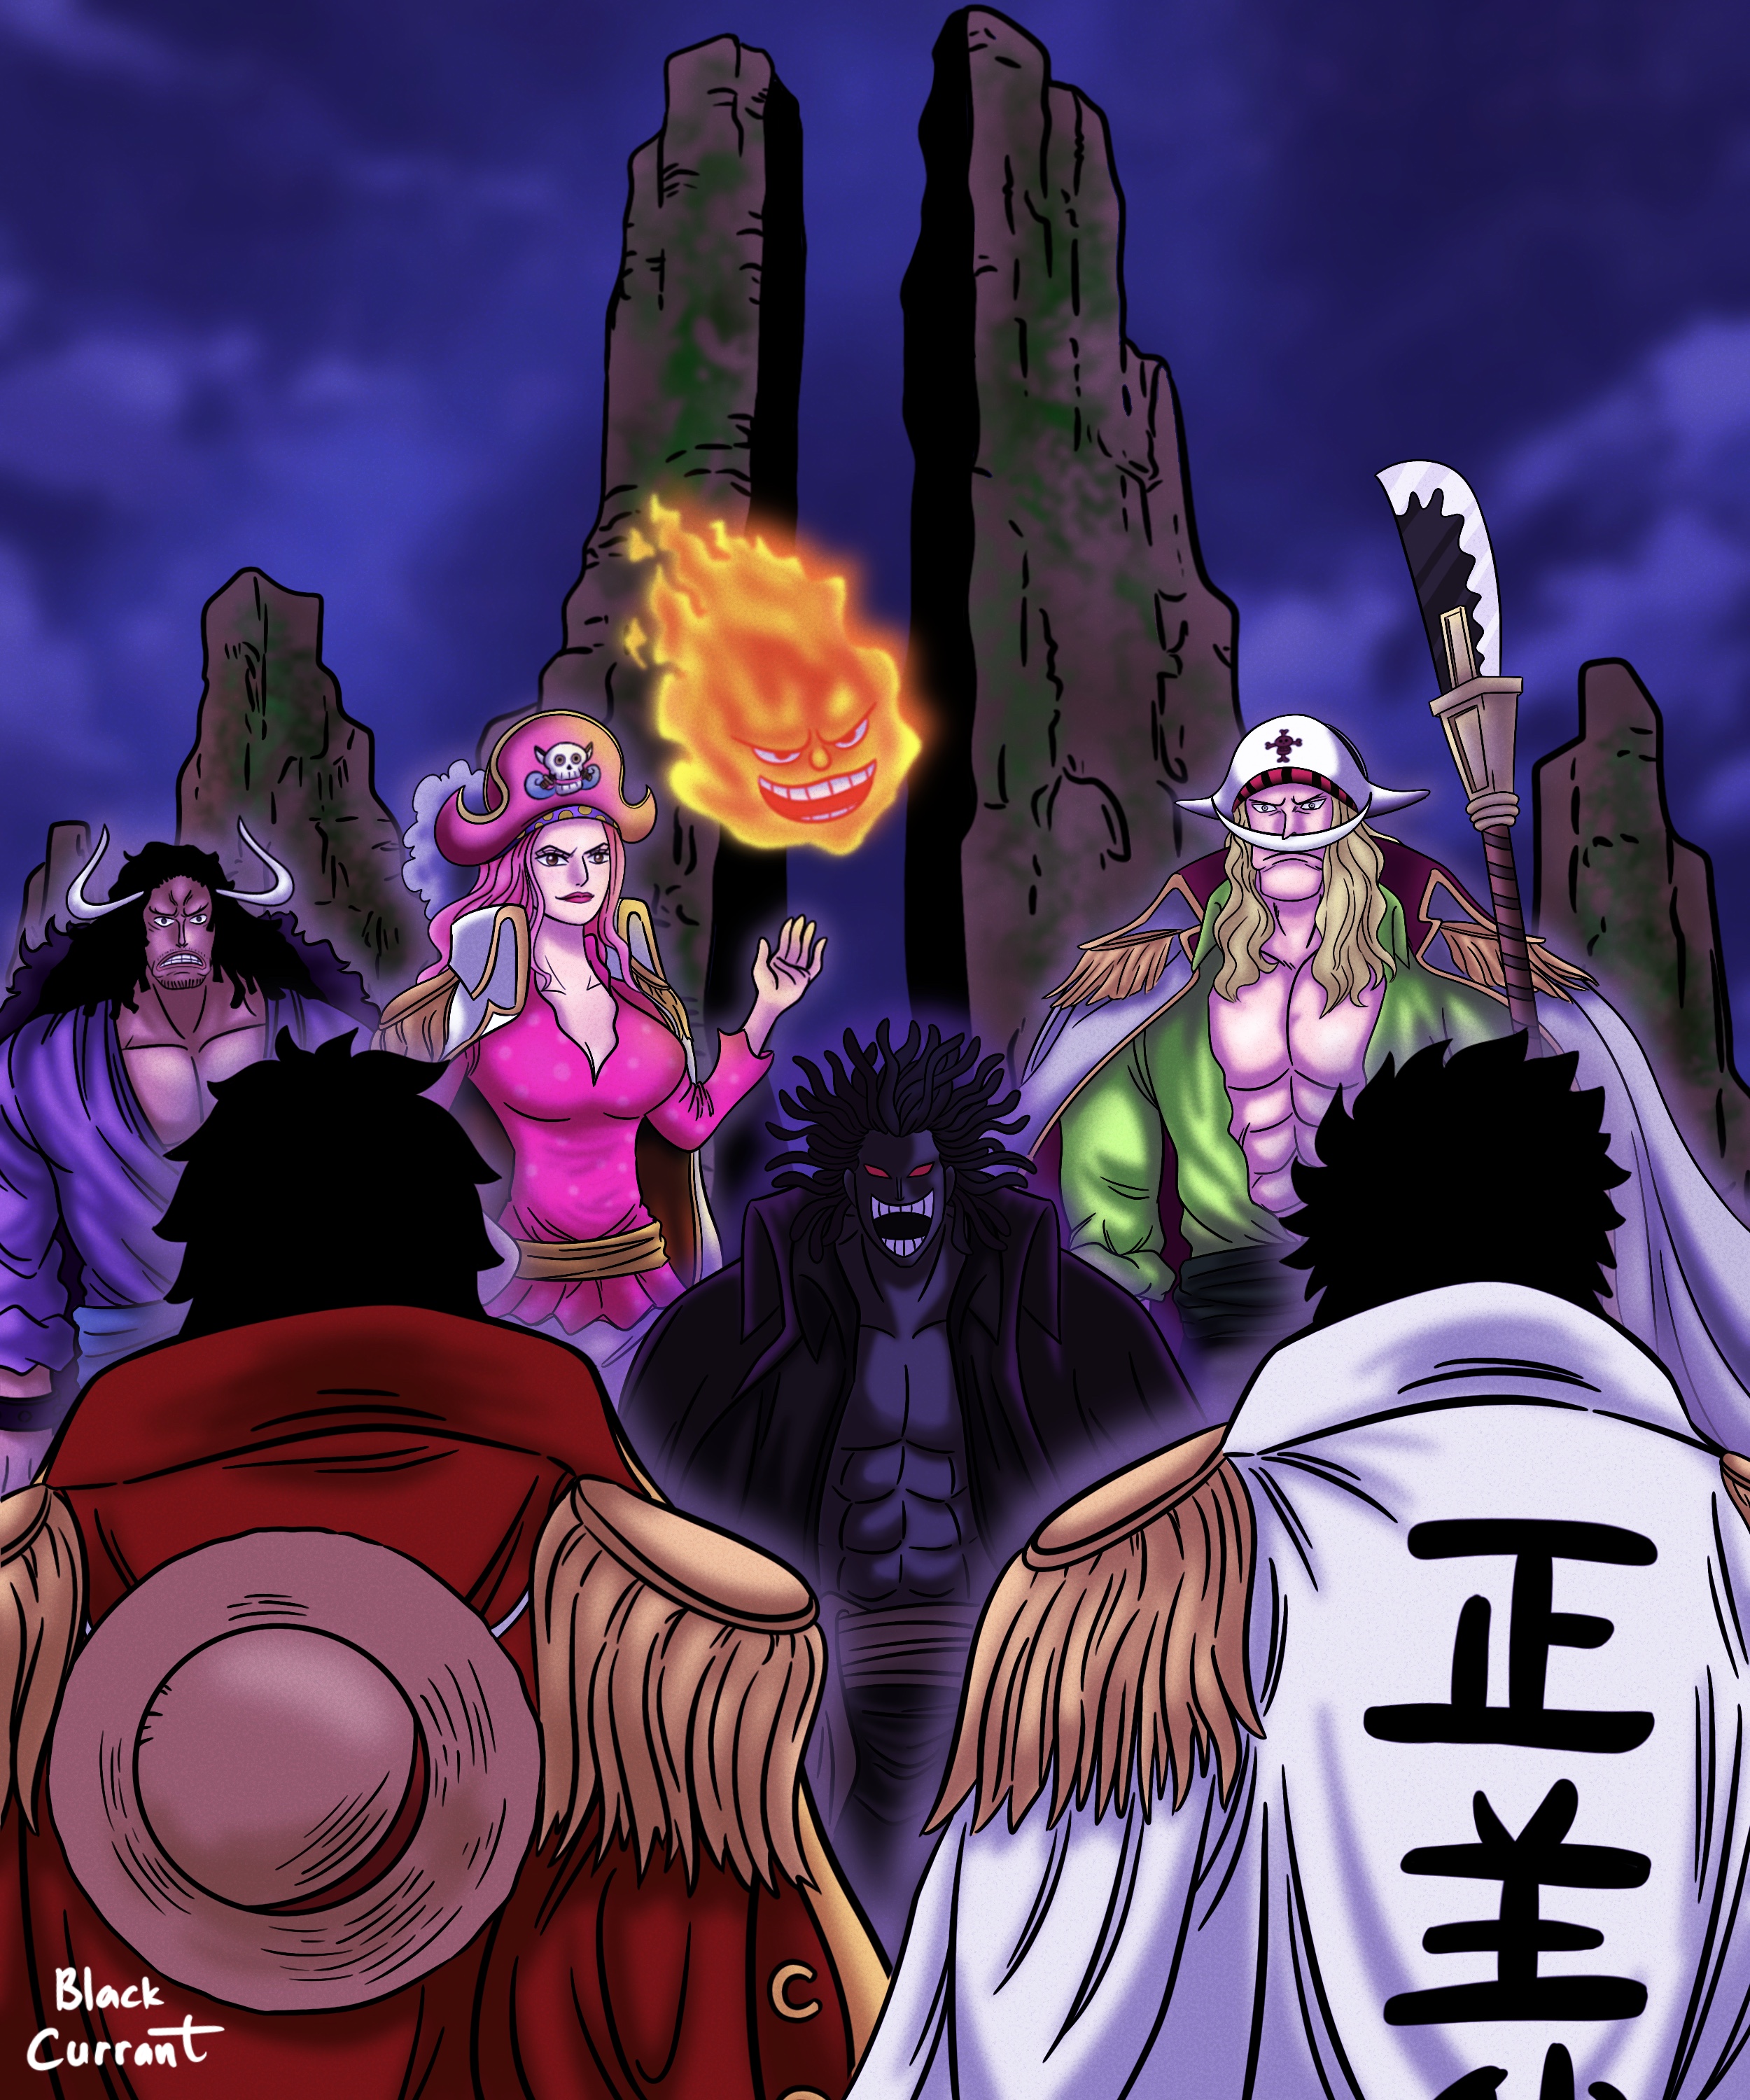 God Valley incident - One Piece by caiquenadal on DeviantArt